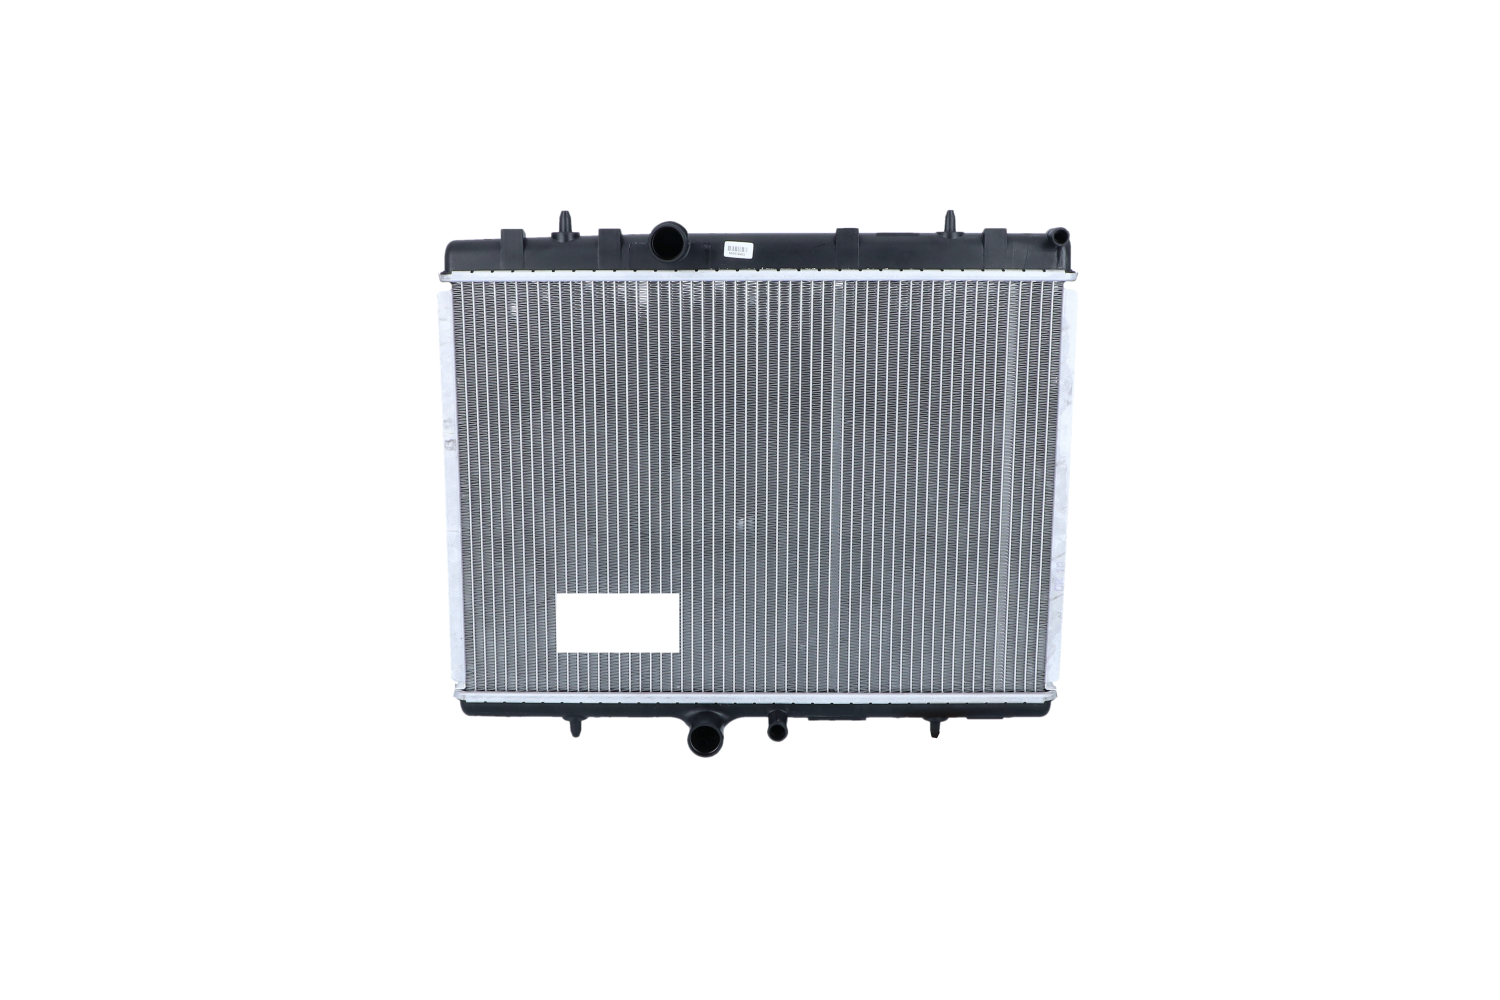 NRF EASY FIT Aluminium, 557 x 380 x 27 mm, with mounting parts, Brazed cooling fins Radiator 50438 buy